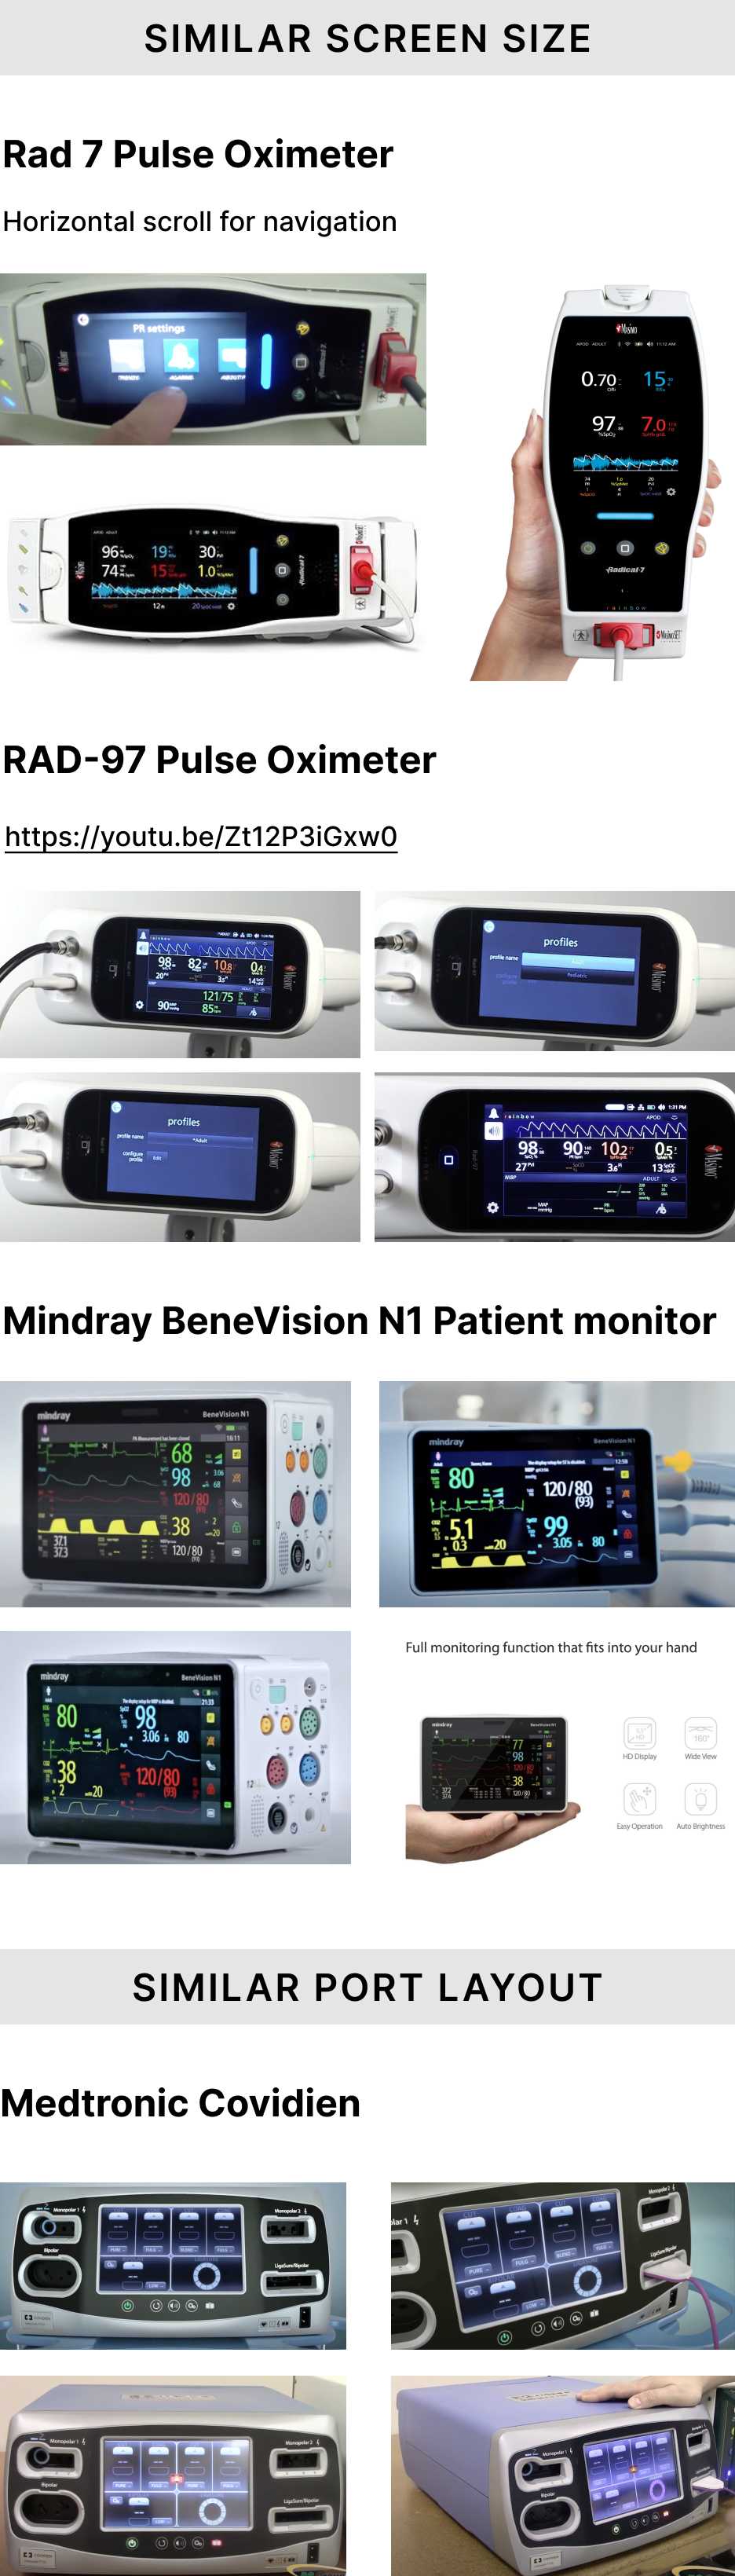 User interface example of medical device